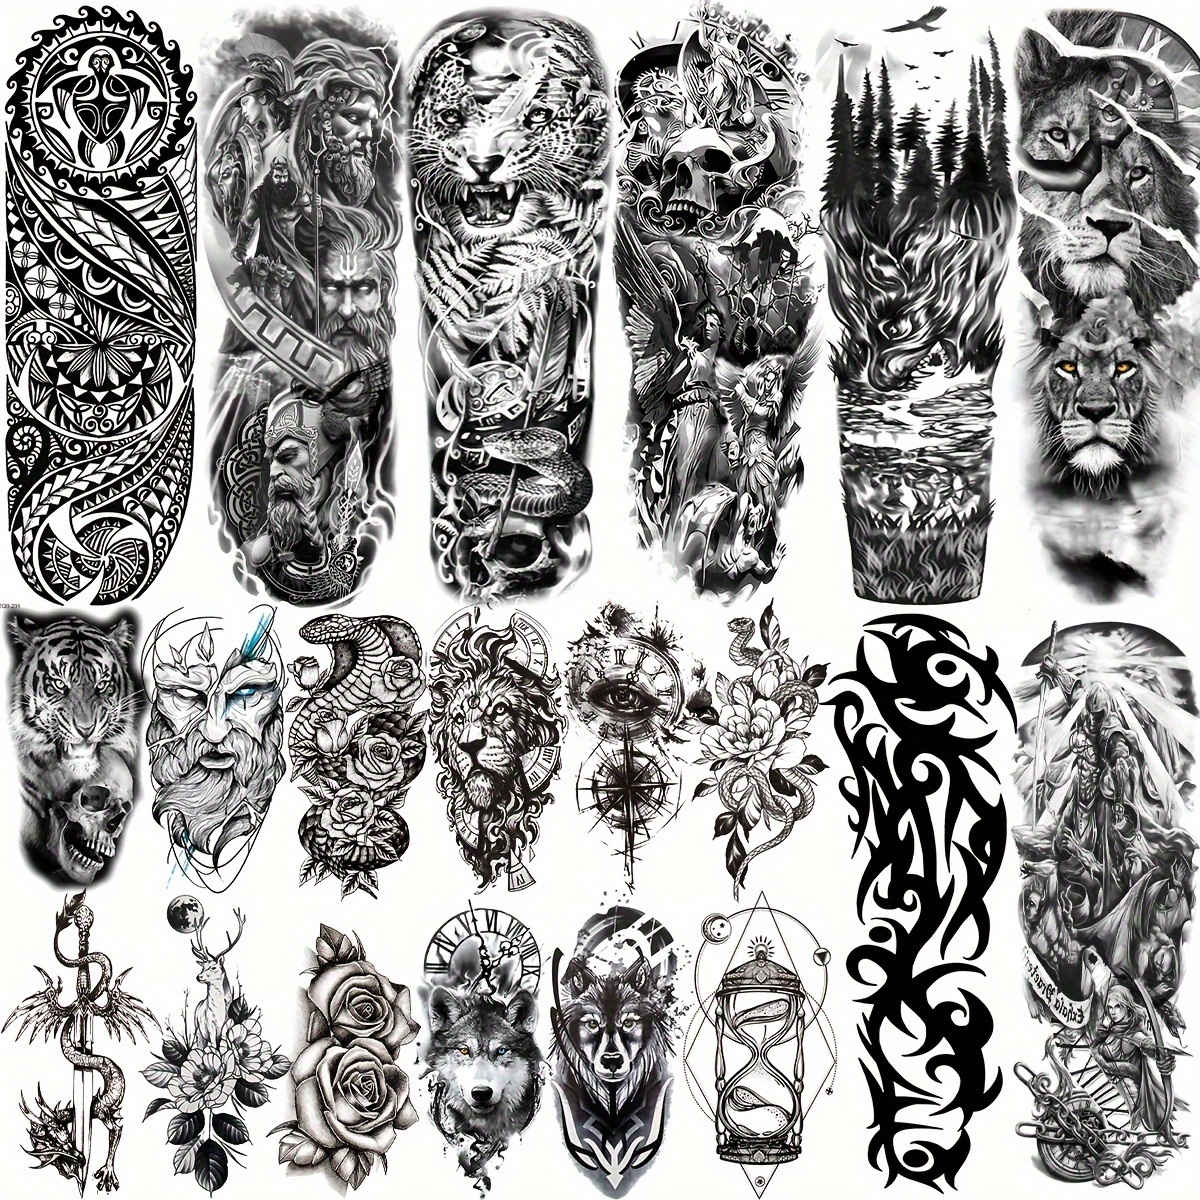 

20-piece Realistic Temporary Tattoos For Men & Women - Waterproof, Long-lasting Body Art With Lion, , Knight Designs - Perfect For Arms, Legs, Thighs